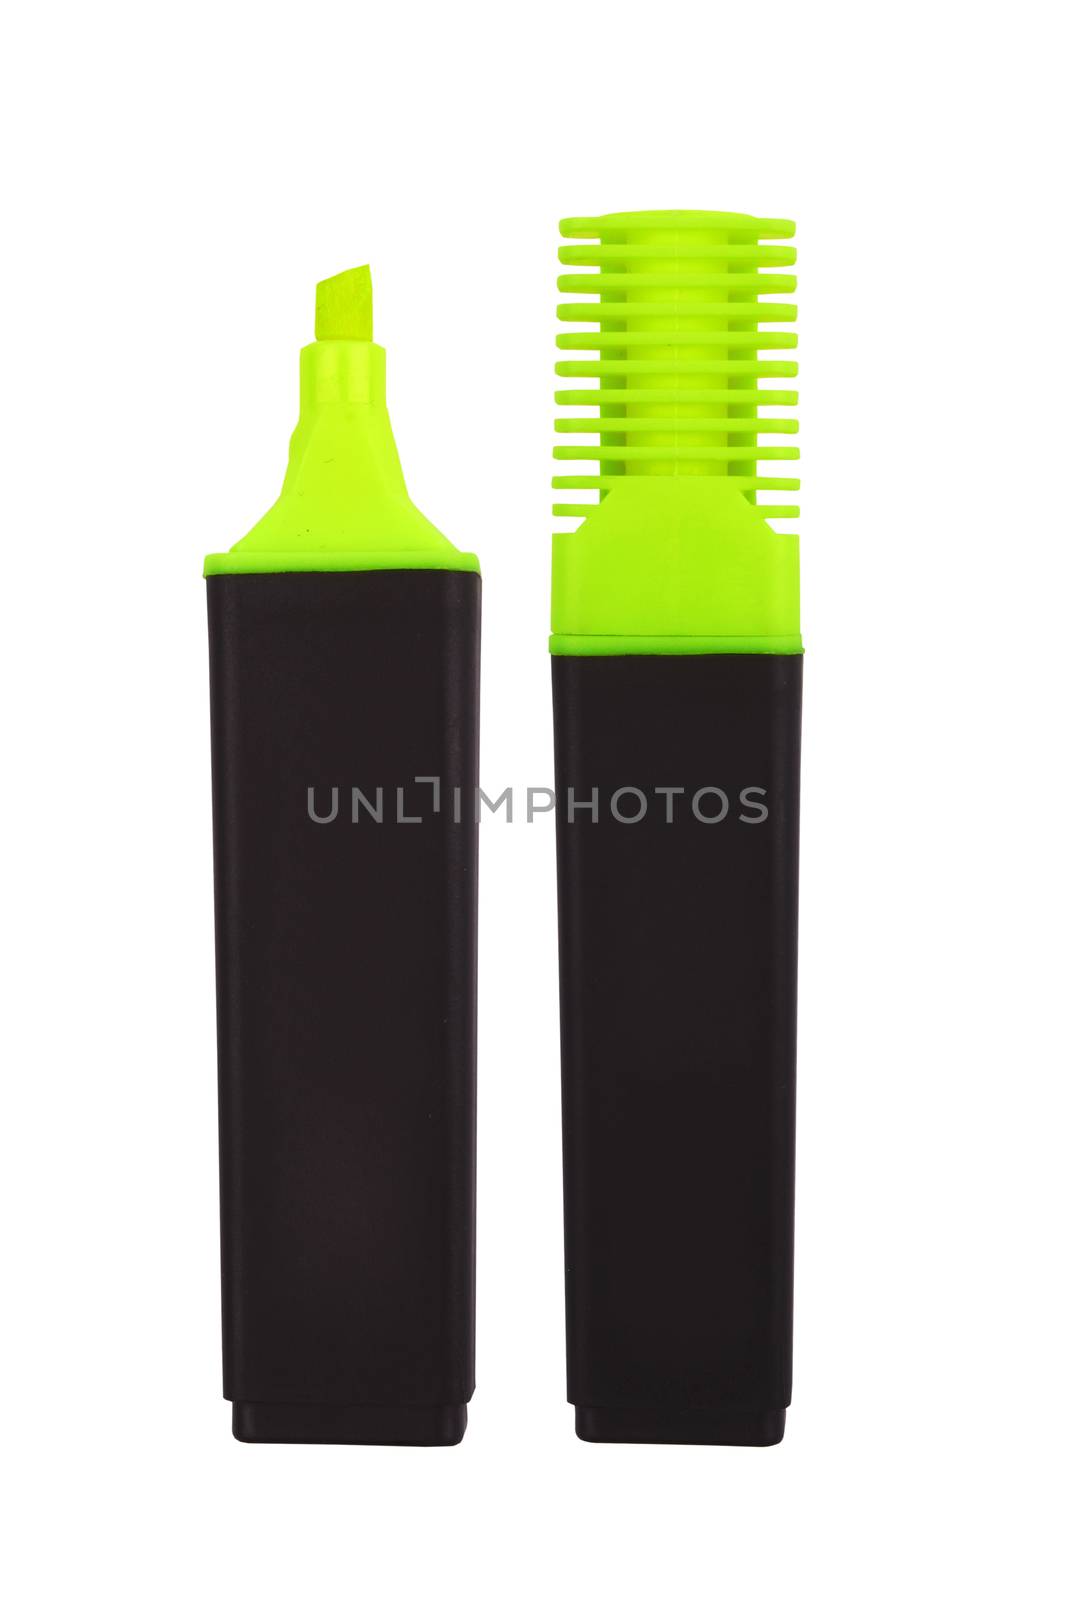 Green highlighter isolated on white background 